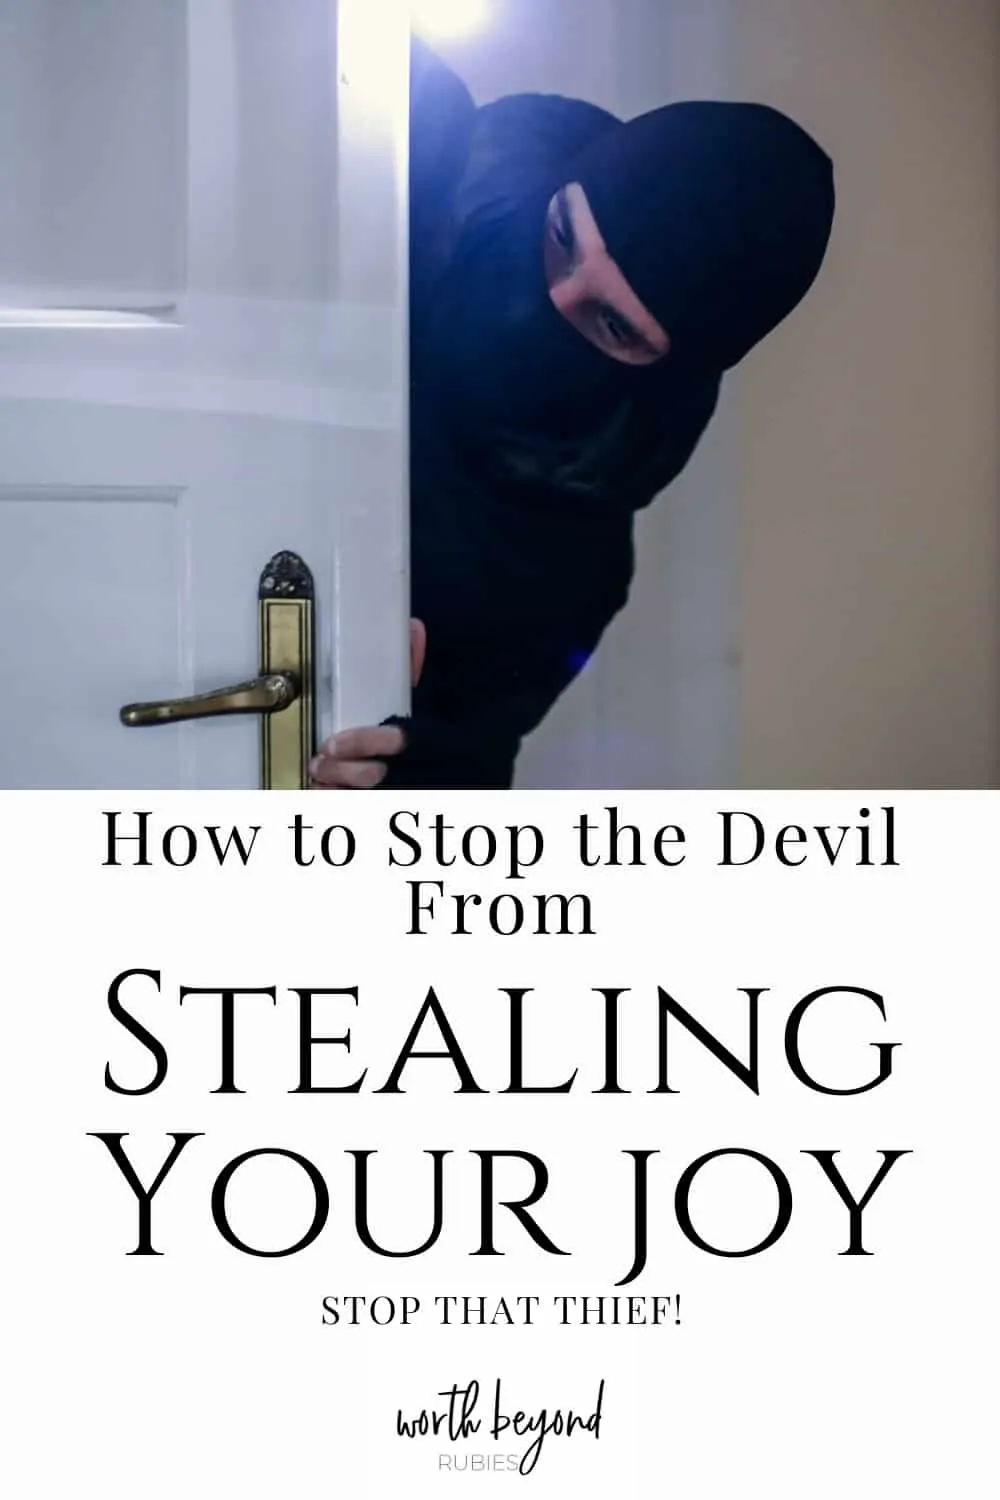 An image of a thief in all black slipping into a doorway and text that says How to Stop the Devil From Stealing Your Joy